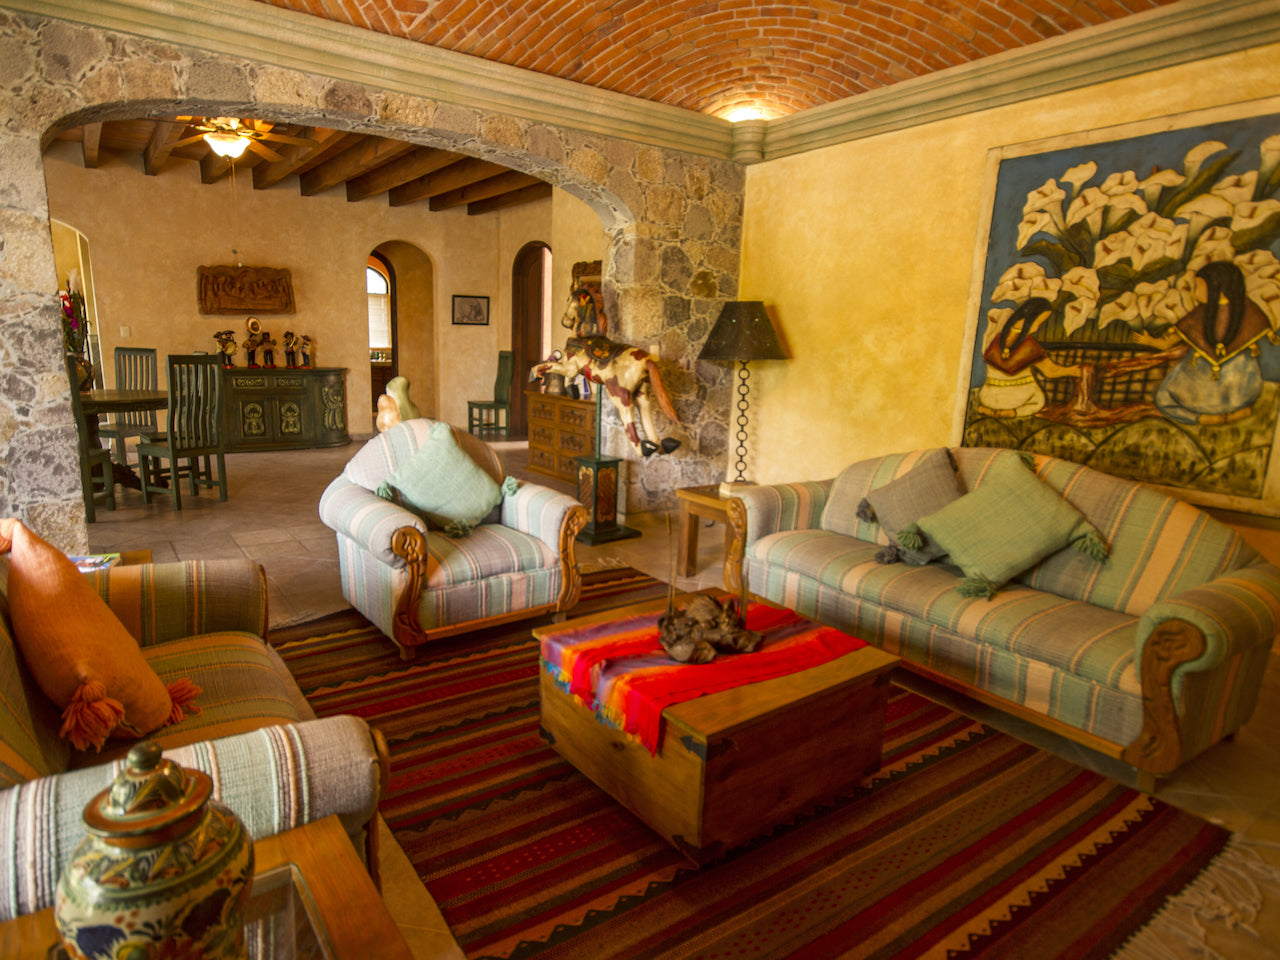 La Casa del Huizache spacious living area. Beyond, the dining area and the rooms. Welcomes 4 persons in 2 suites